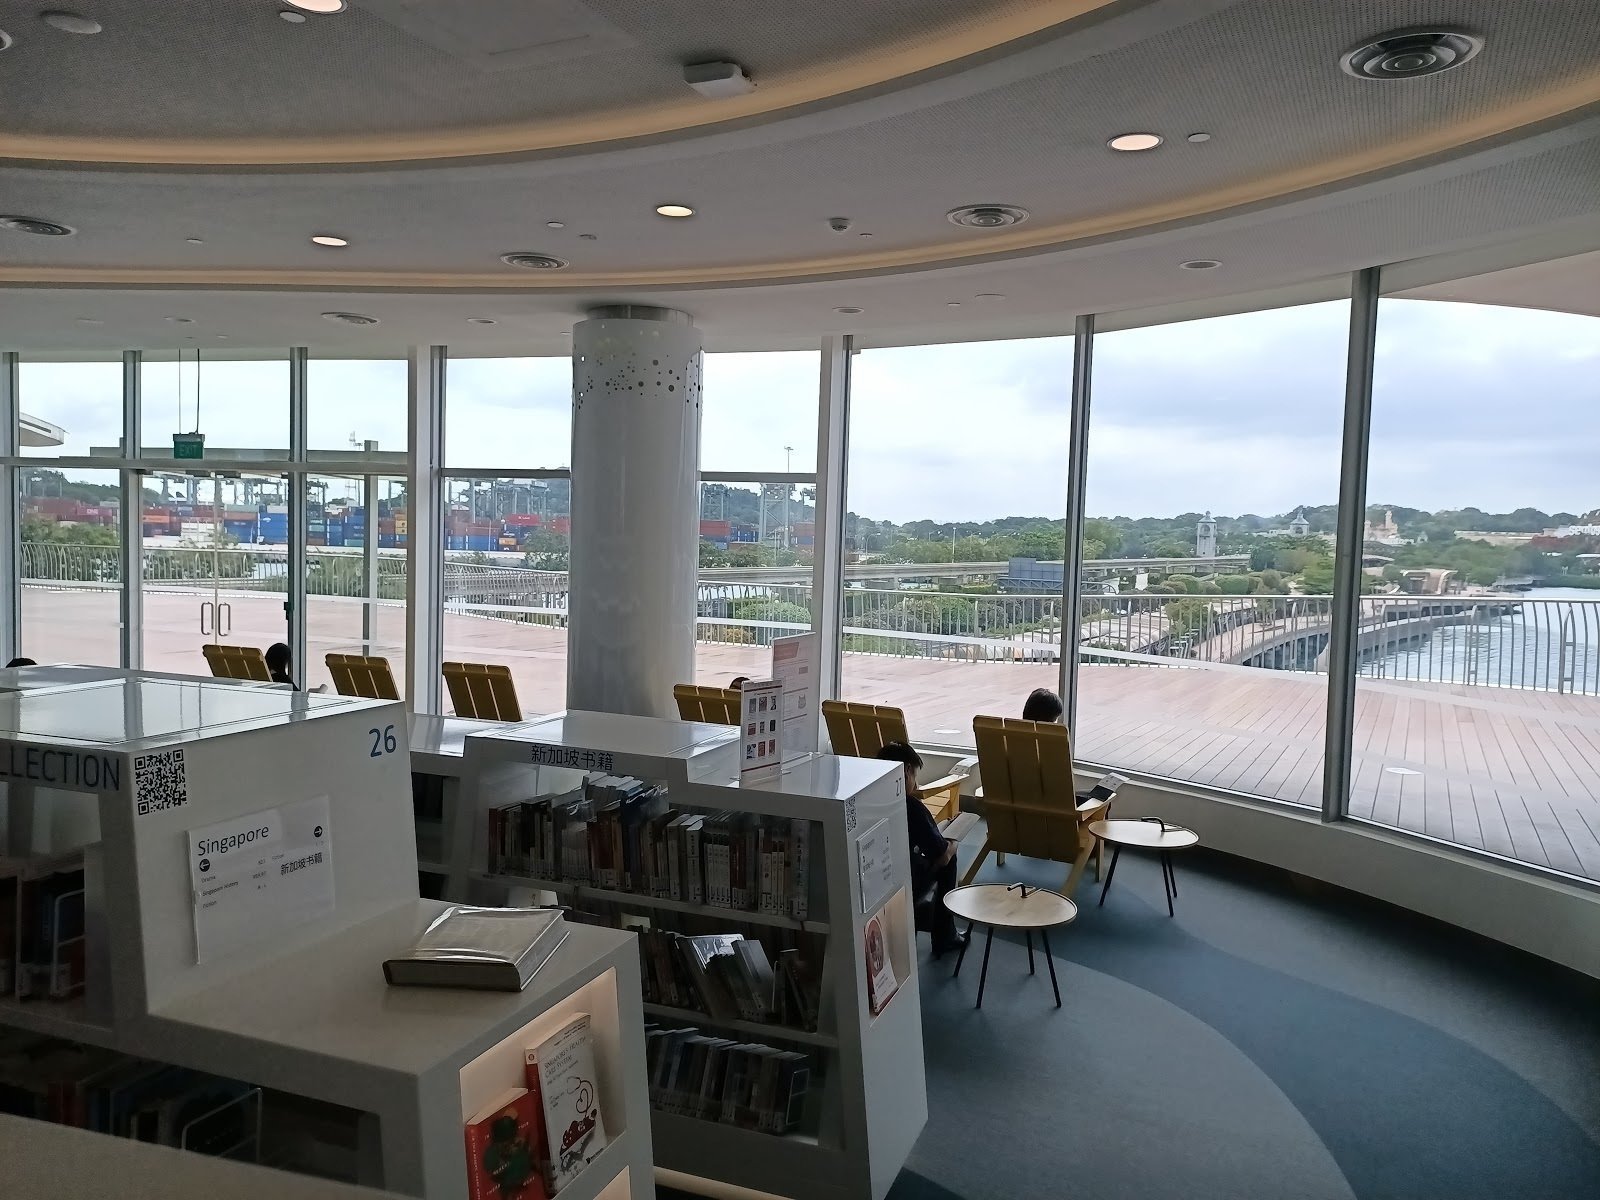 <span class="translation_missing" title="translation missing: en.meta.location_title, location_name: library@harbourfront, city: Singapore">Location Title</span>